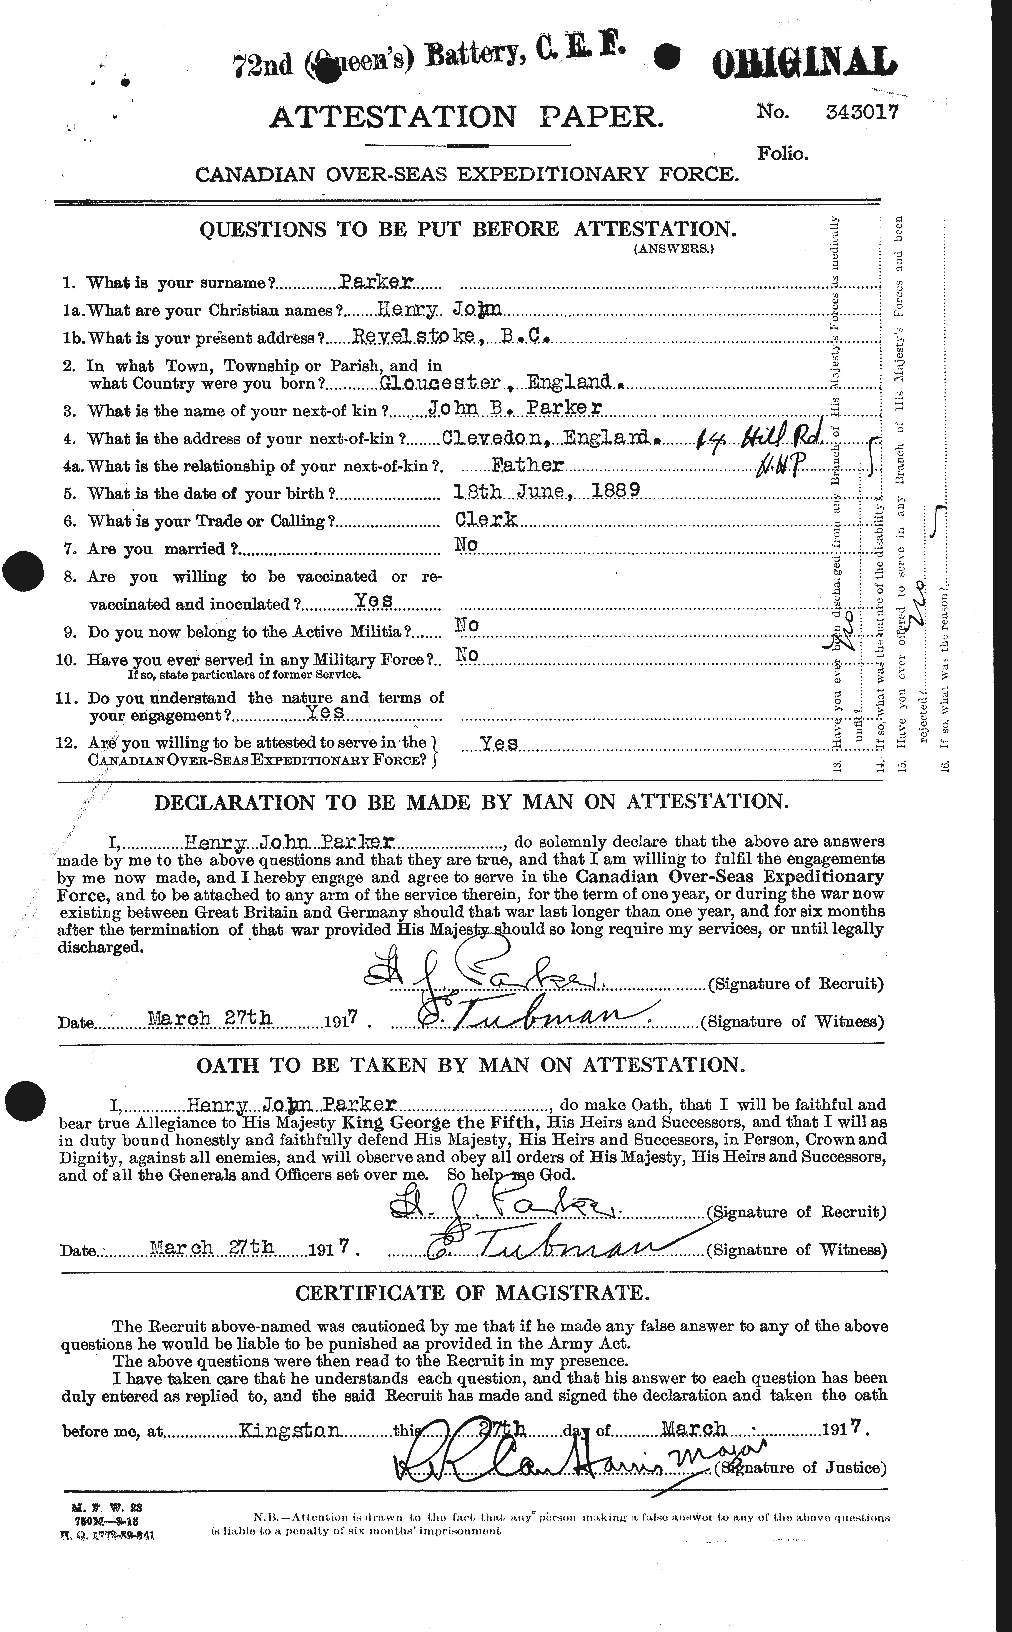 Personnel Records of the First World War - CEF 565358a